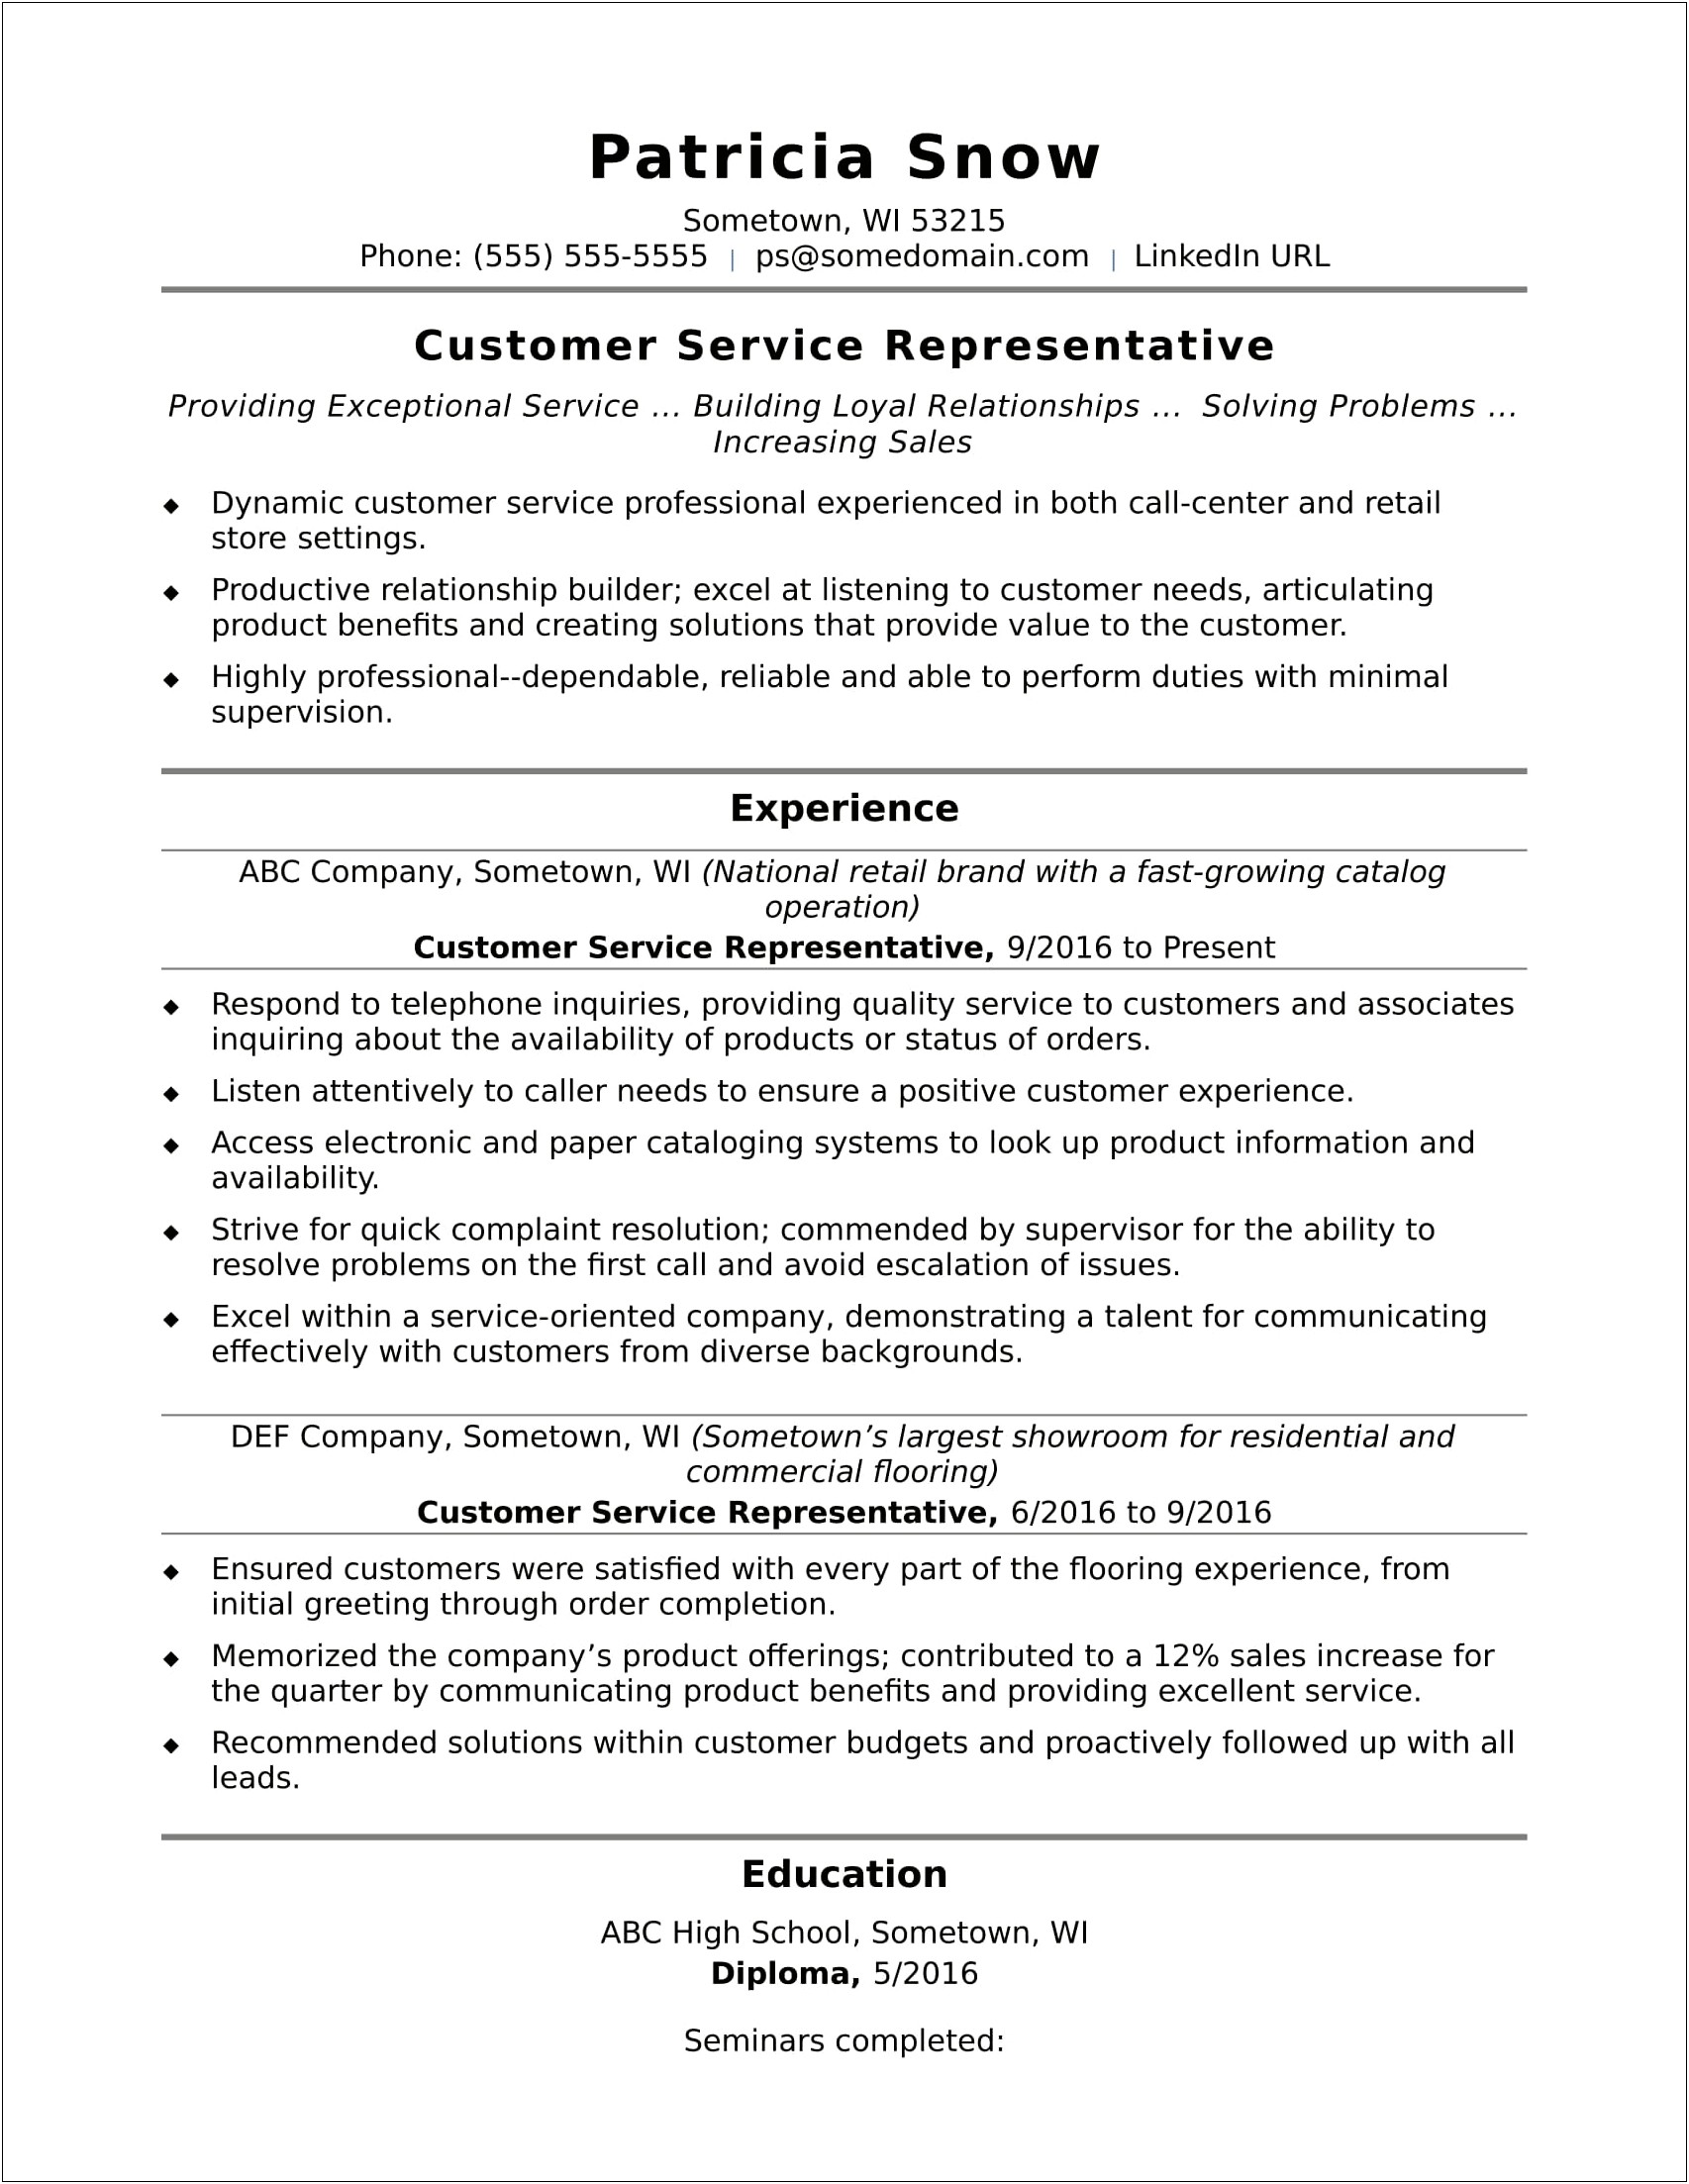 Resume Objective For Call Center Agent Without Experience